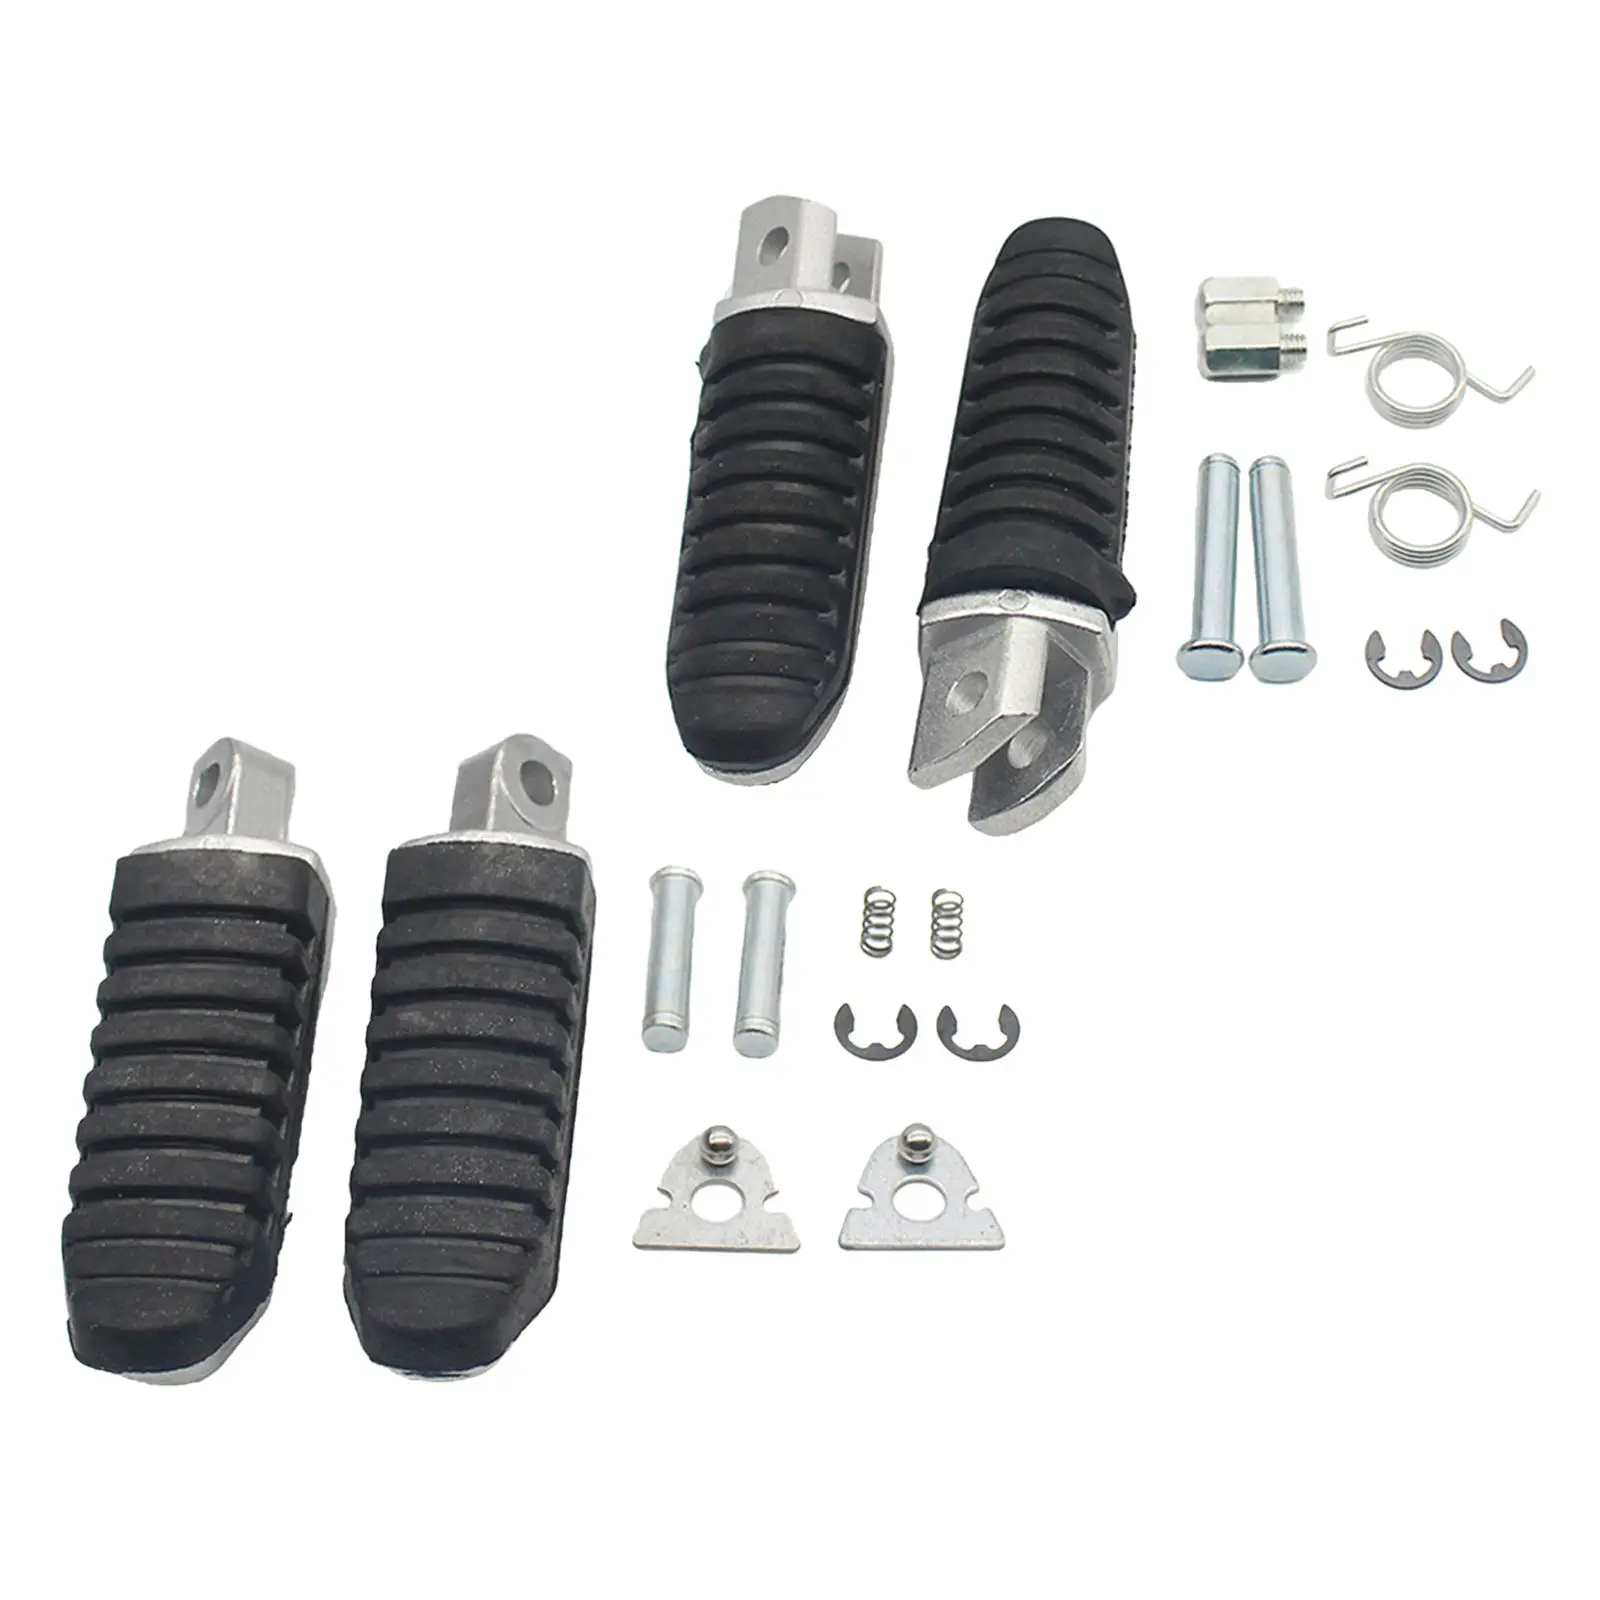 Motorcycle Foot Pegs Foot Rest Pedals Fit for Suzuki V-Strom GSX1300R Parts High Performance